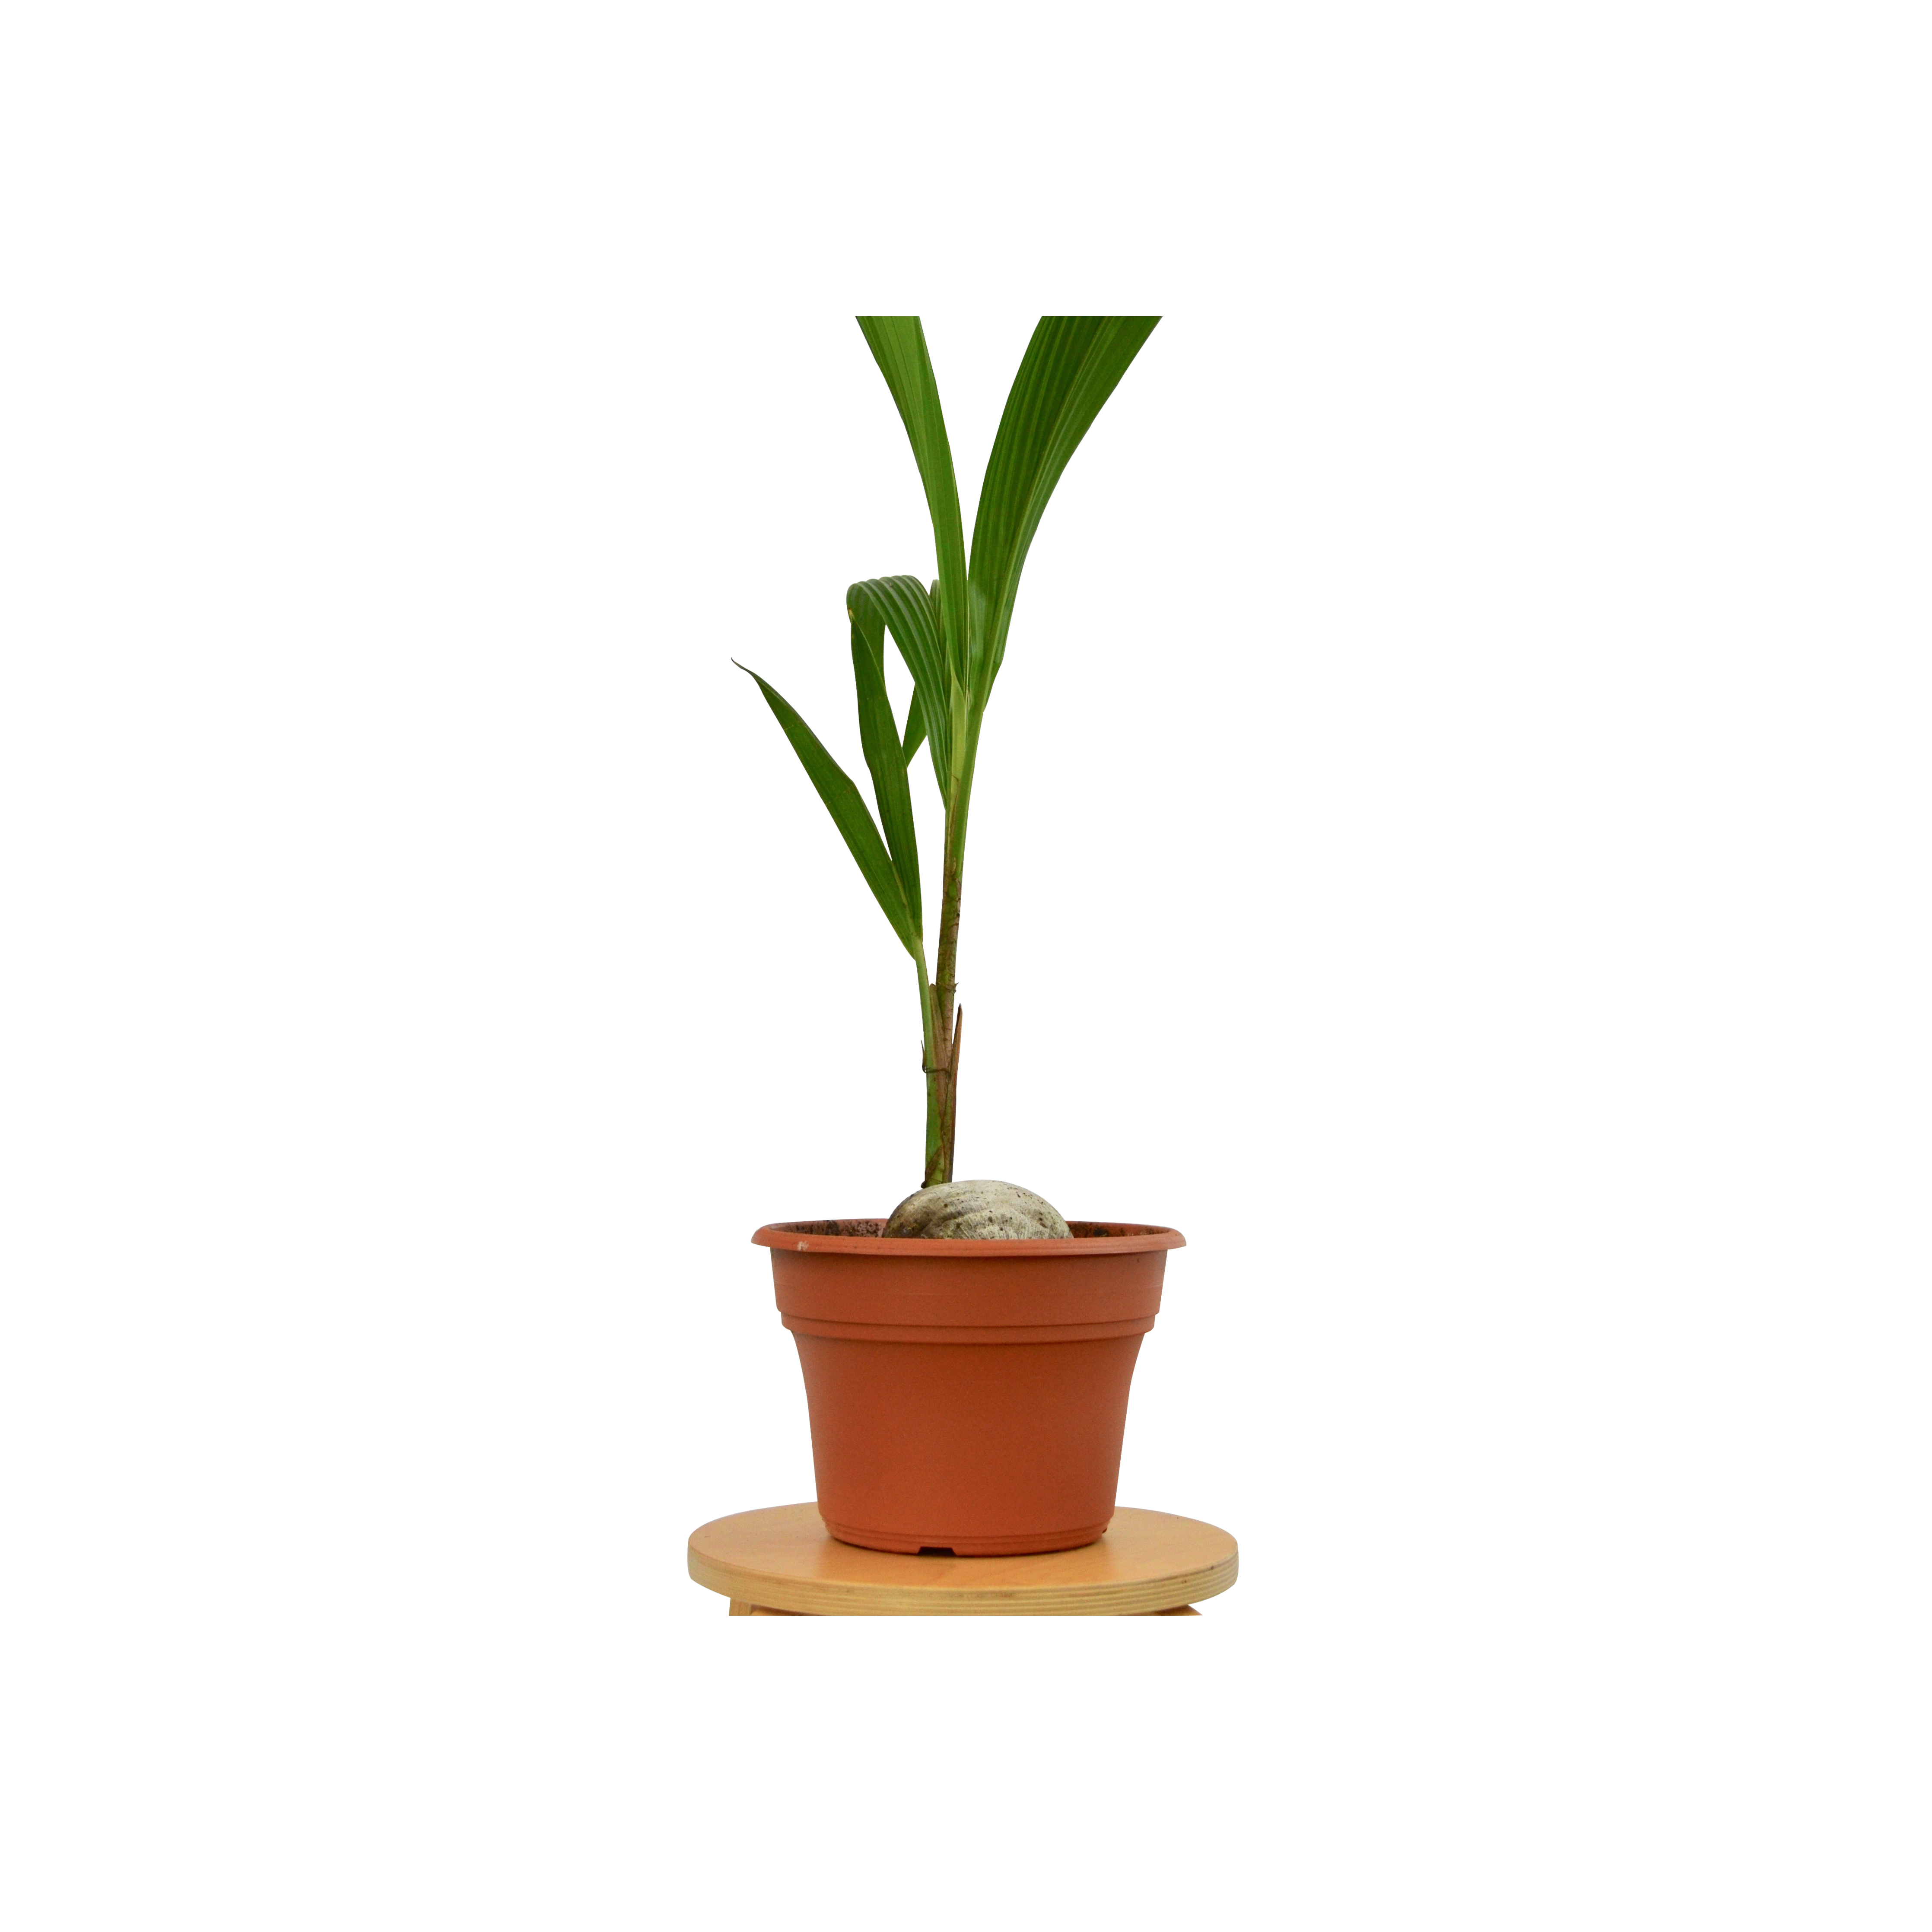 A small potted plant on a wooden stand, available at the top plant nurseries near me.